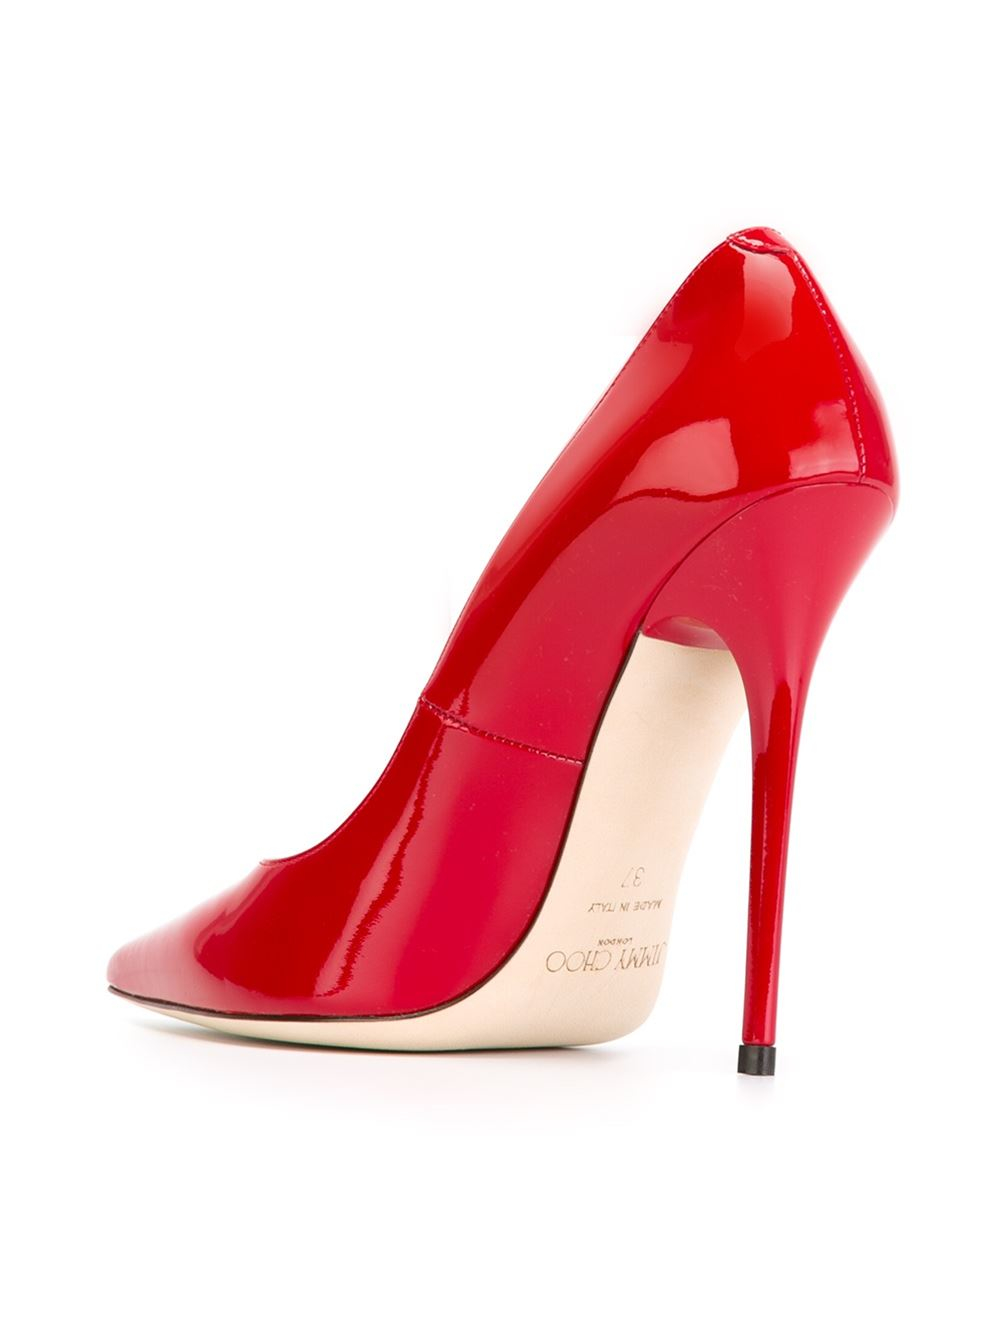 Jimmy Choo Anouk Patent-Leather Pumps in Red - Lyst